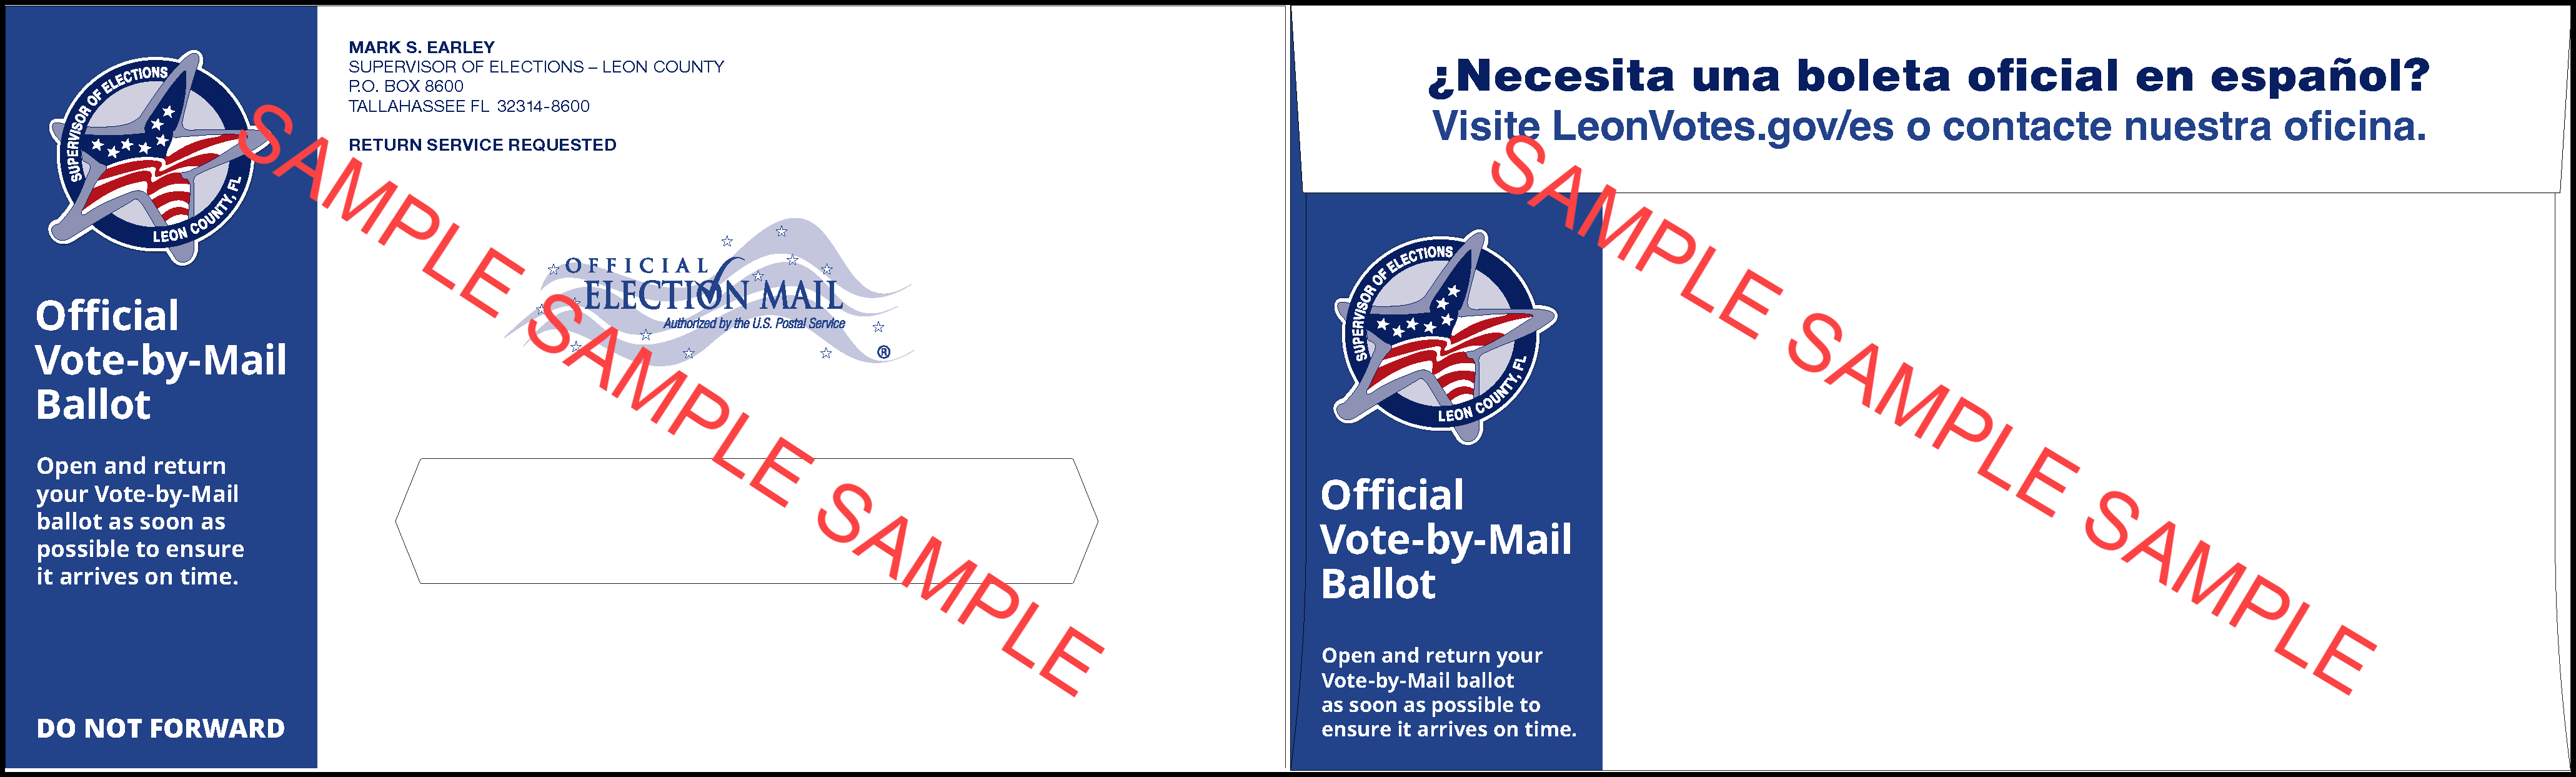 Vote-by-Mail outer envelope